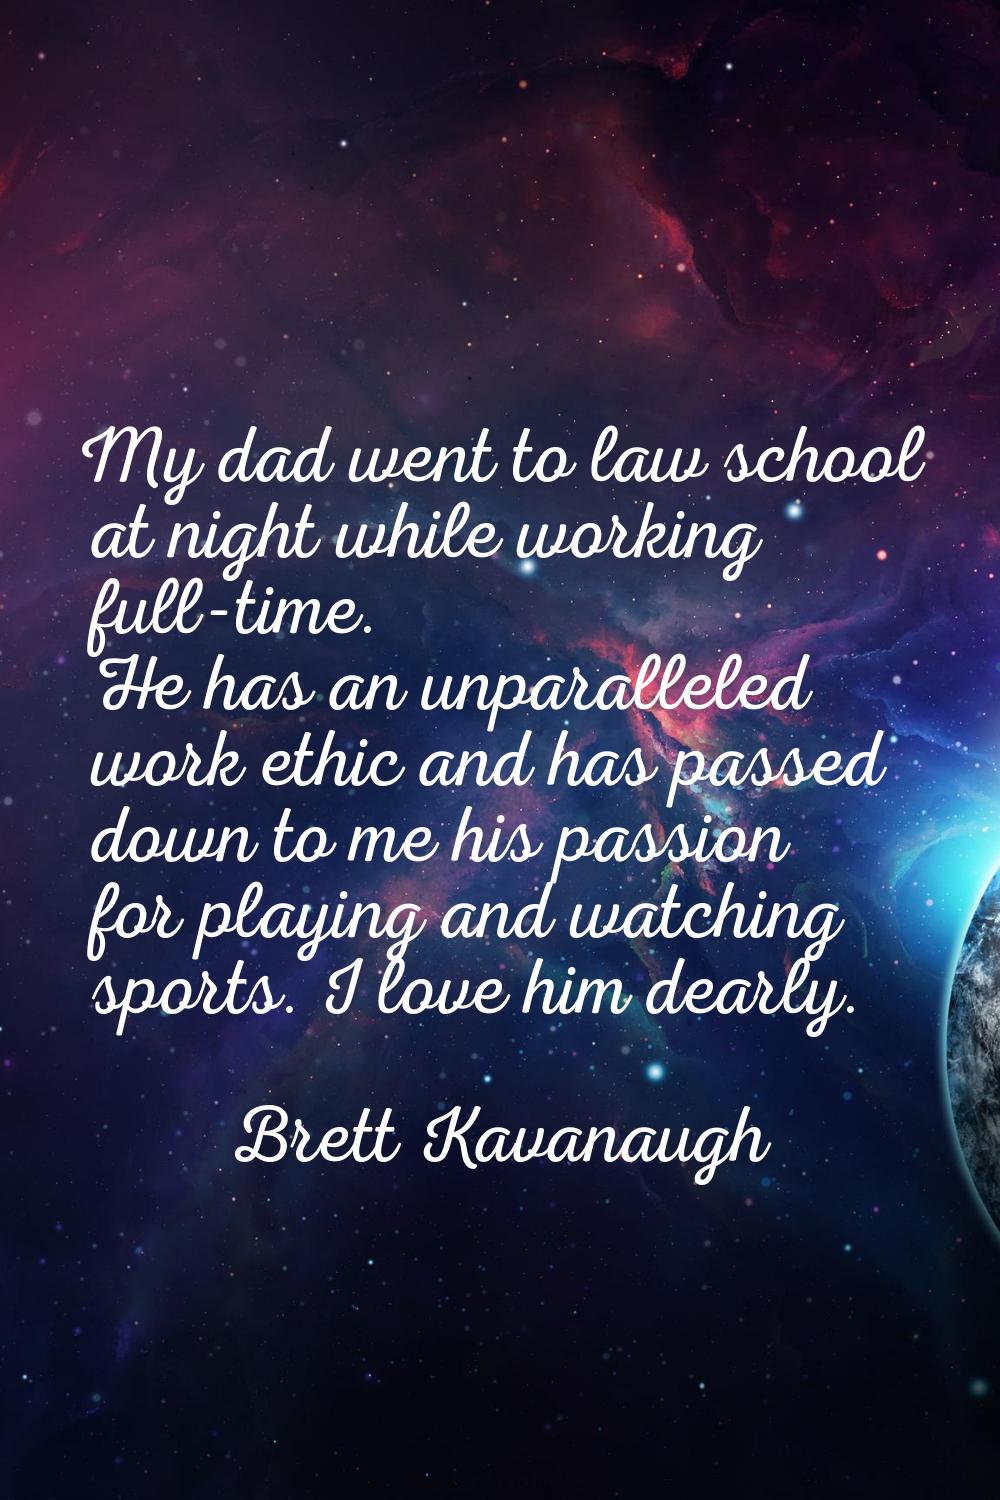 My dad went to law school at night while working full-time. He has an unparalleled work ethic and h